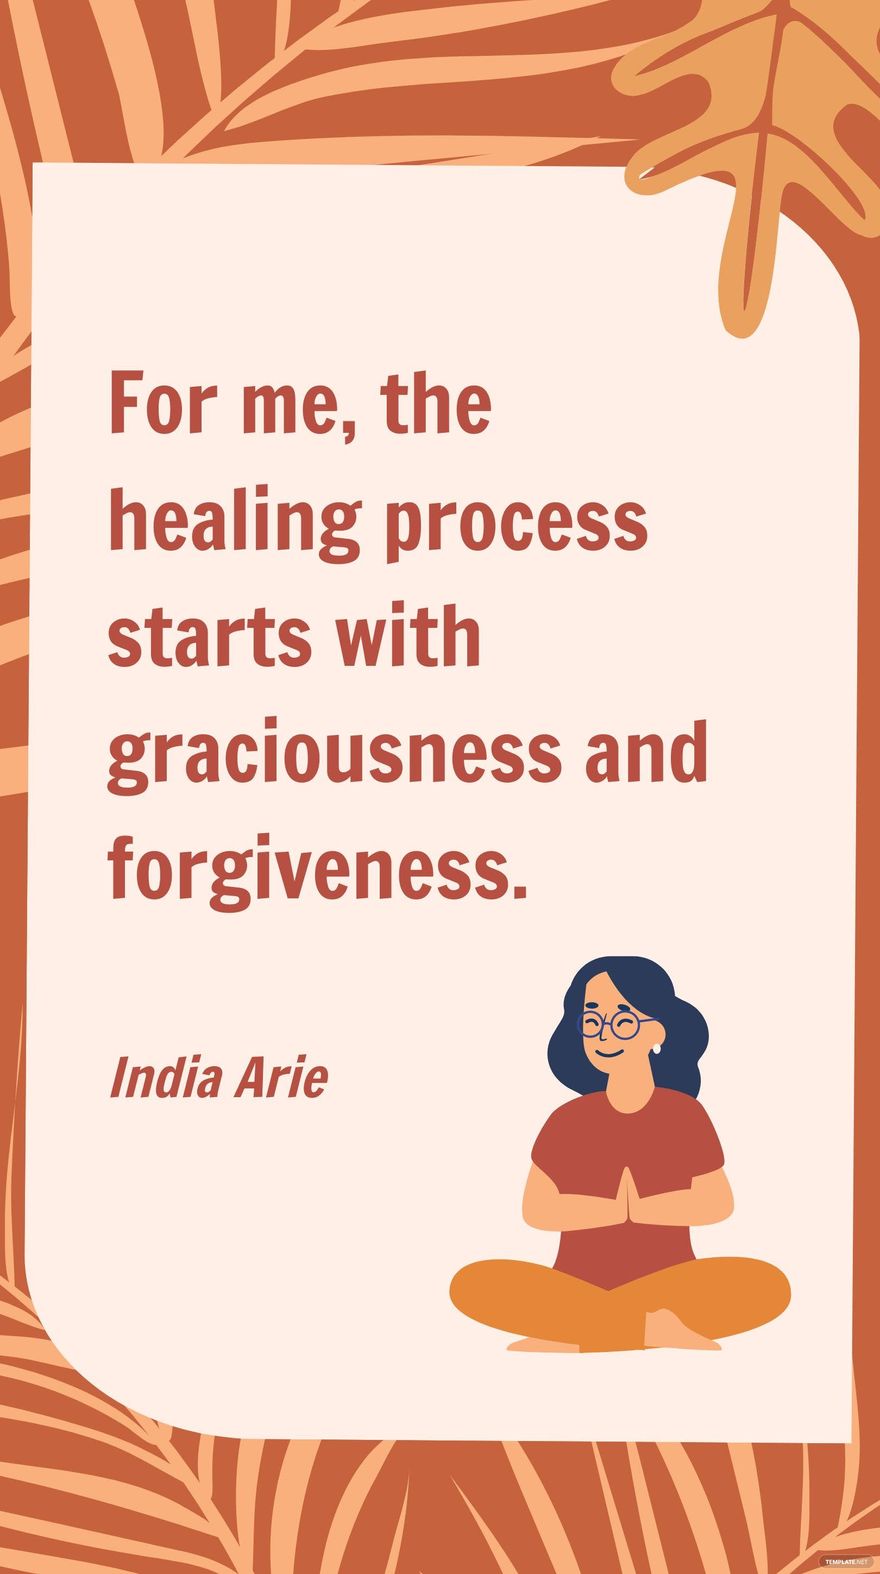 India Arie - For me, the healing process starts with graciousness and forgiveness. in JPG